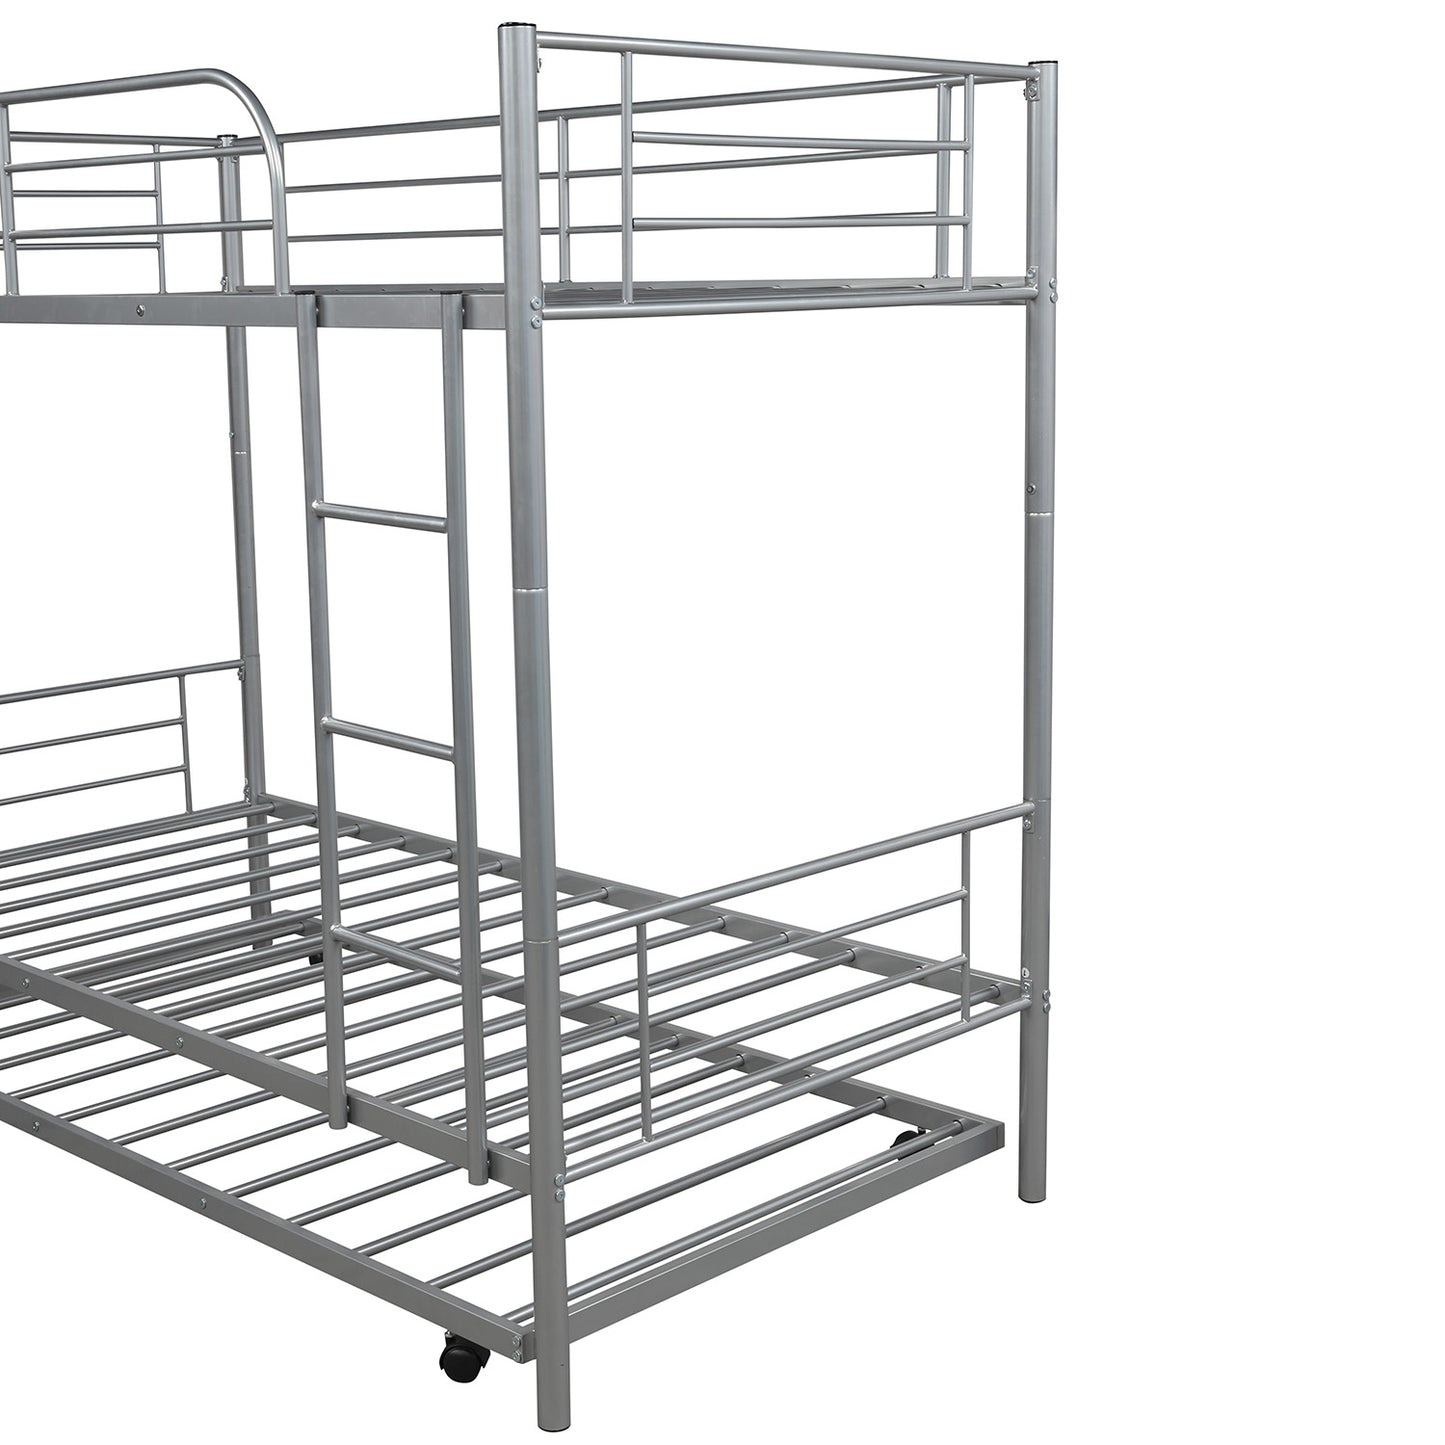 SYNGAR Twin Over Twin Bunk Bed with Trundle, Metal Twin Bed with Safety Guard Rail & Ladders, Space-Saving Design Sleeping Bedroom Bunk Bed for Boys, Girls, Kids, Young Teens & Adults, Easy Assembly